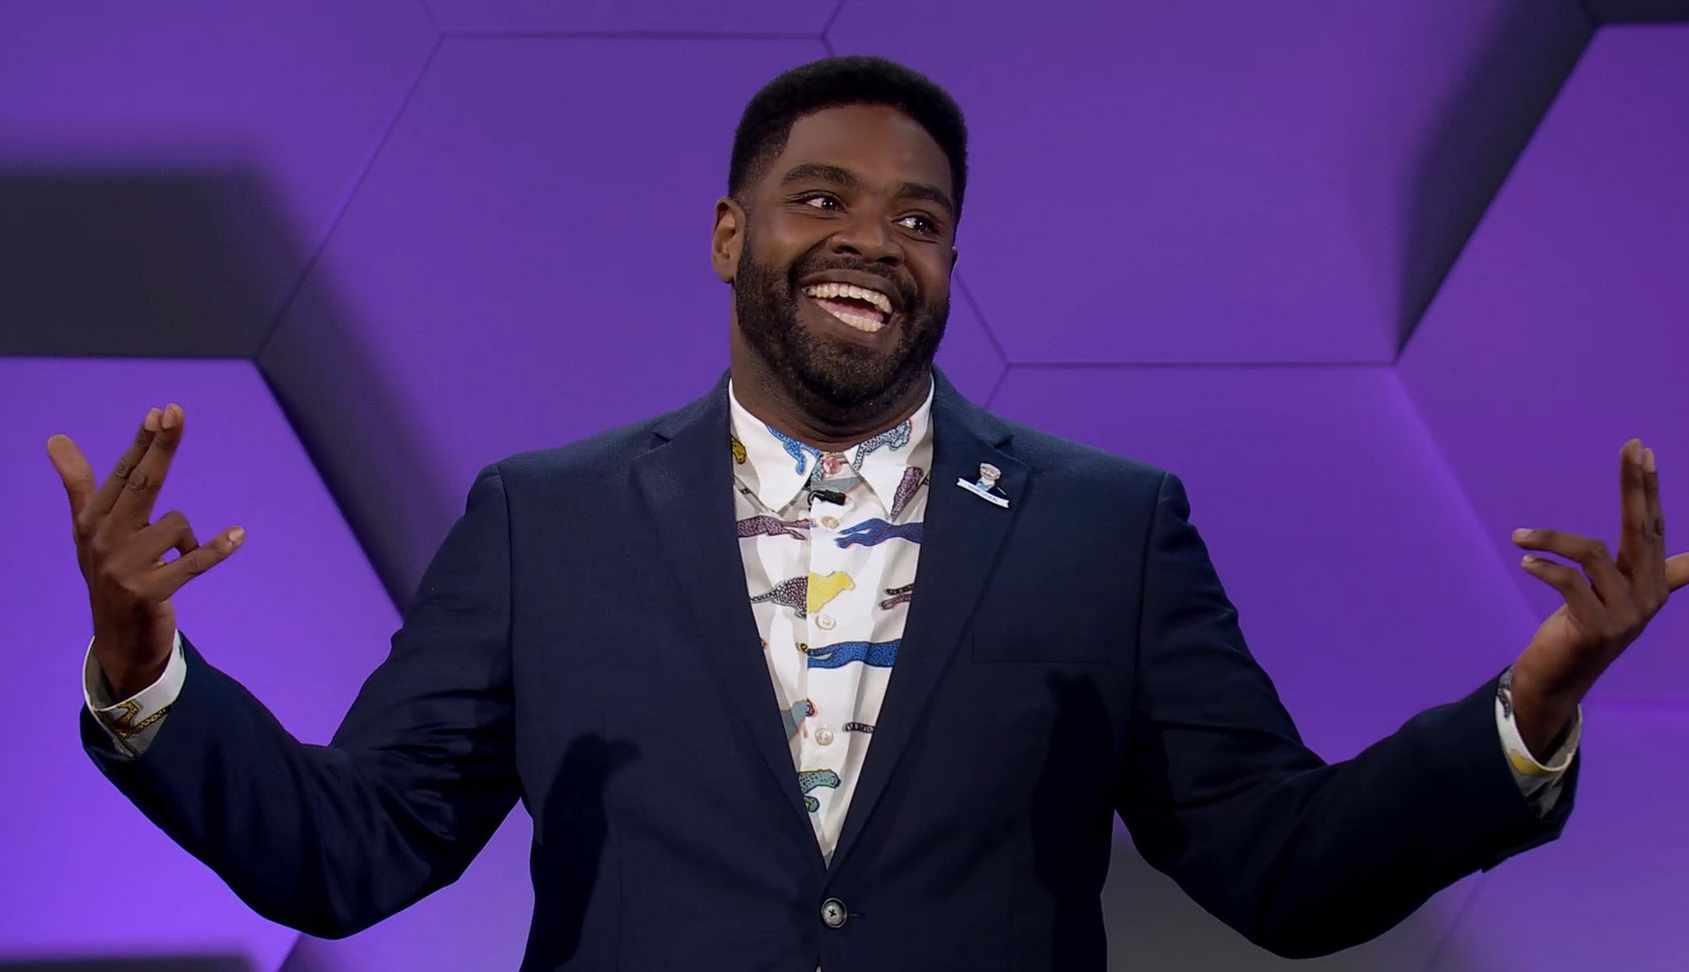 American actor, Ron Funches